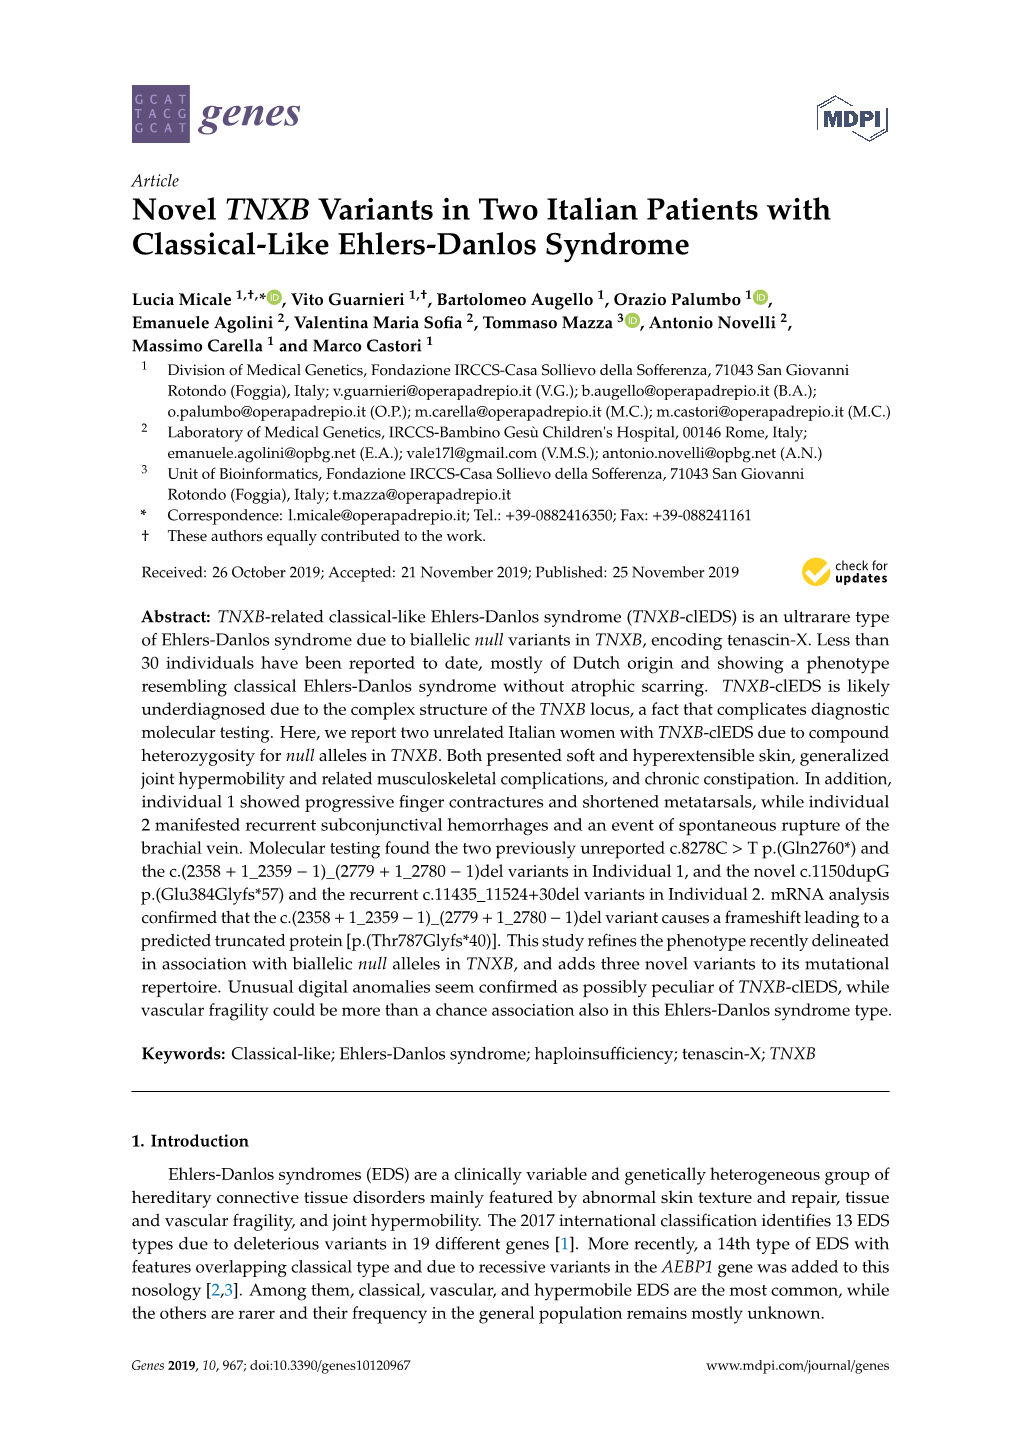 Novel TNXB Variants in Two Italian Patients with Classical-Like Ehlers-Danlos Syndrome